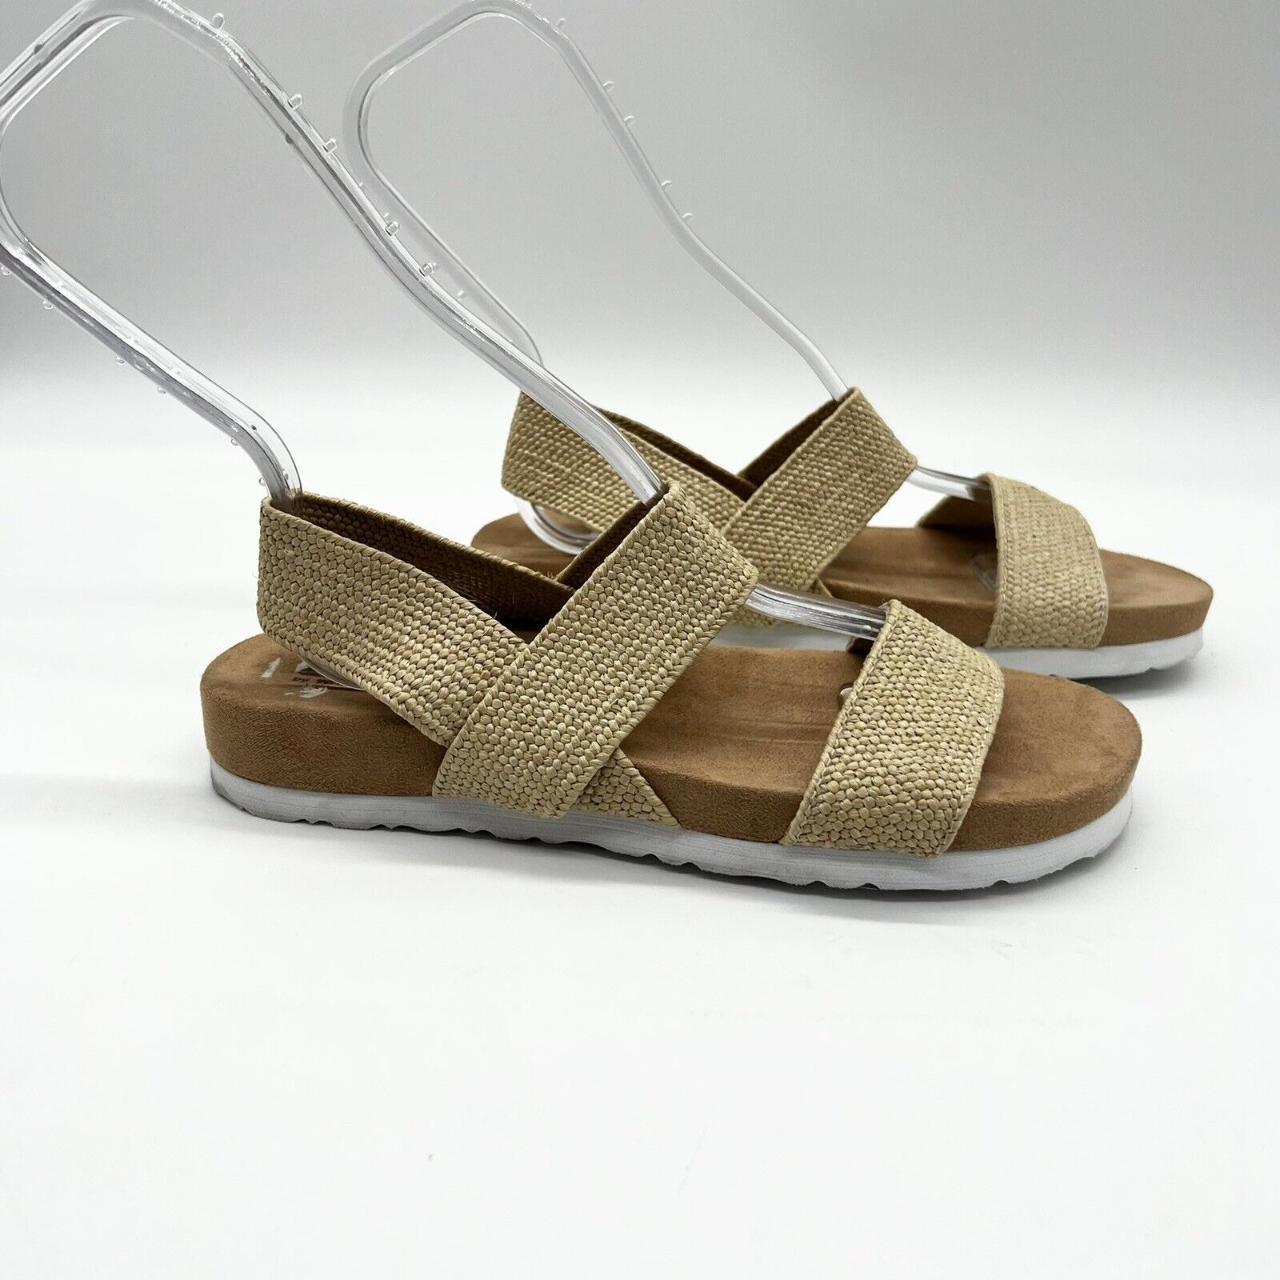 Cliffs by White Mountain Women's Tan and White Sandals (3)